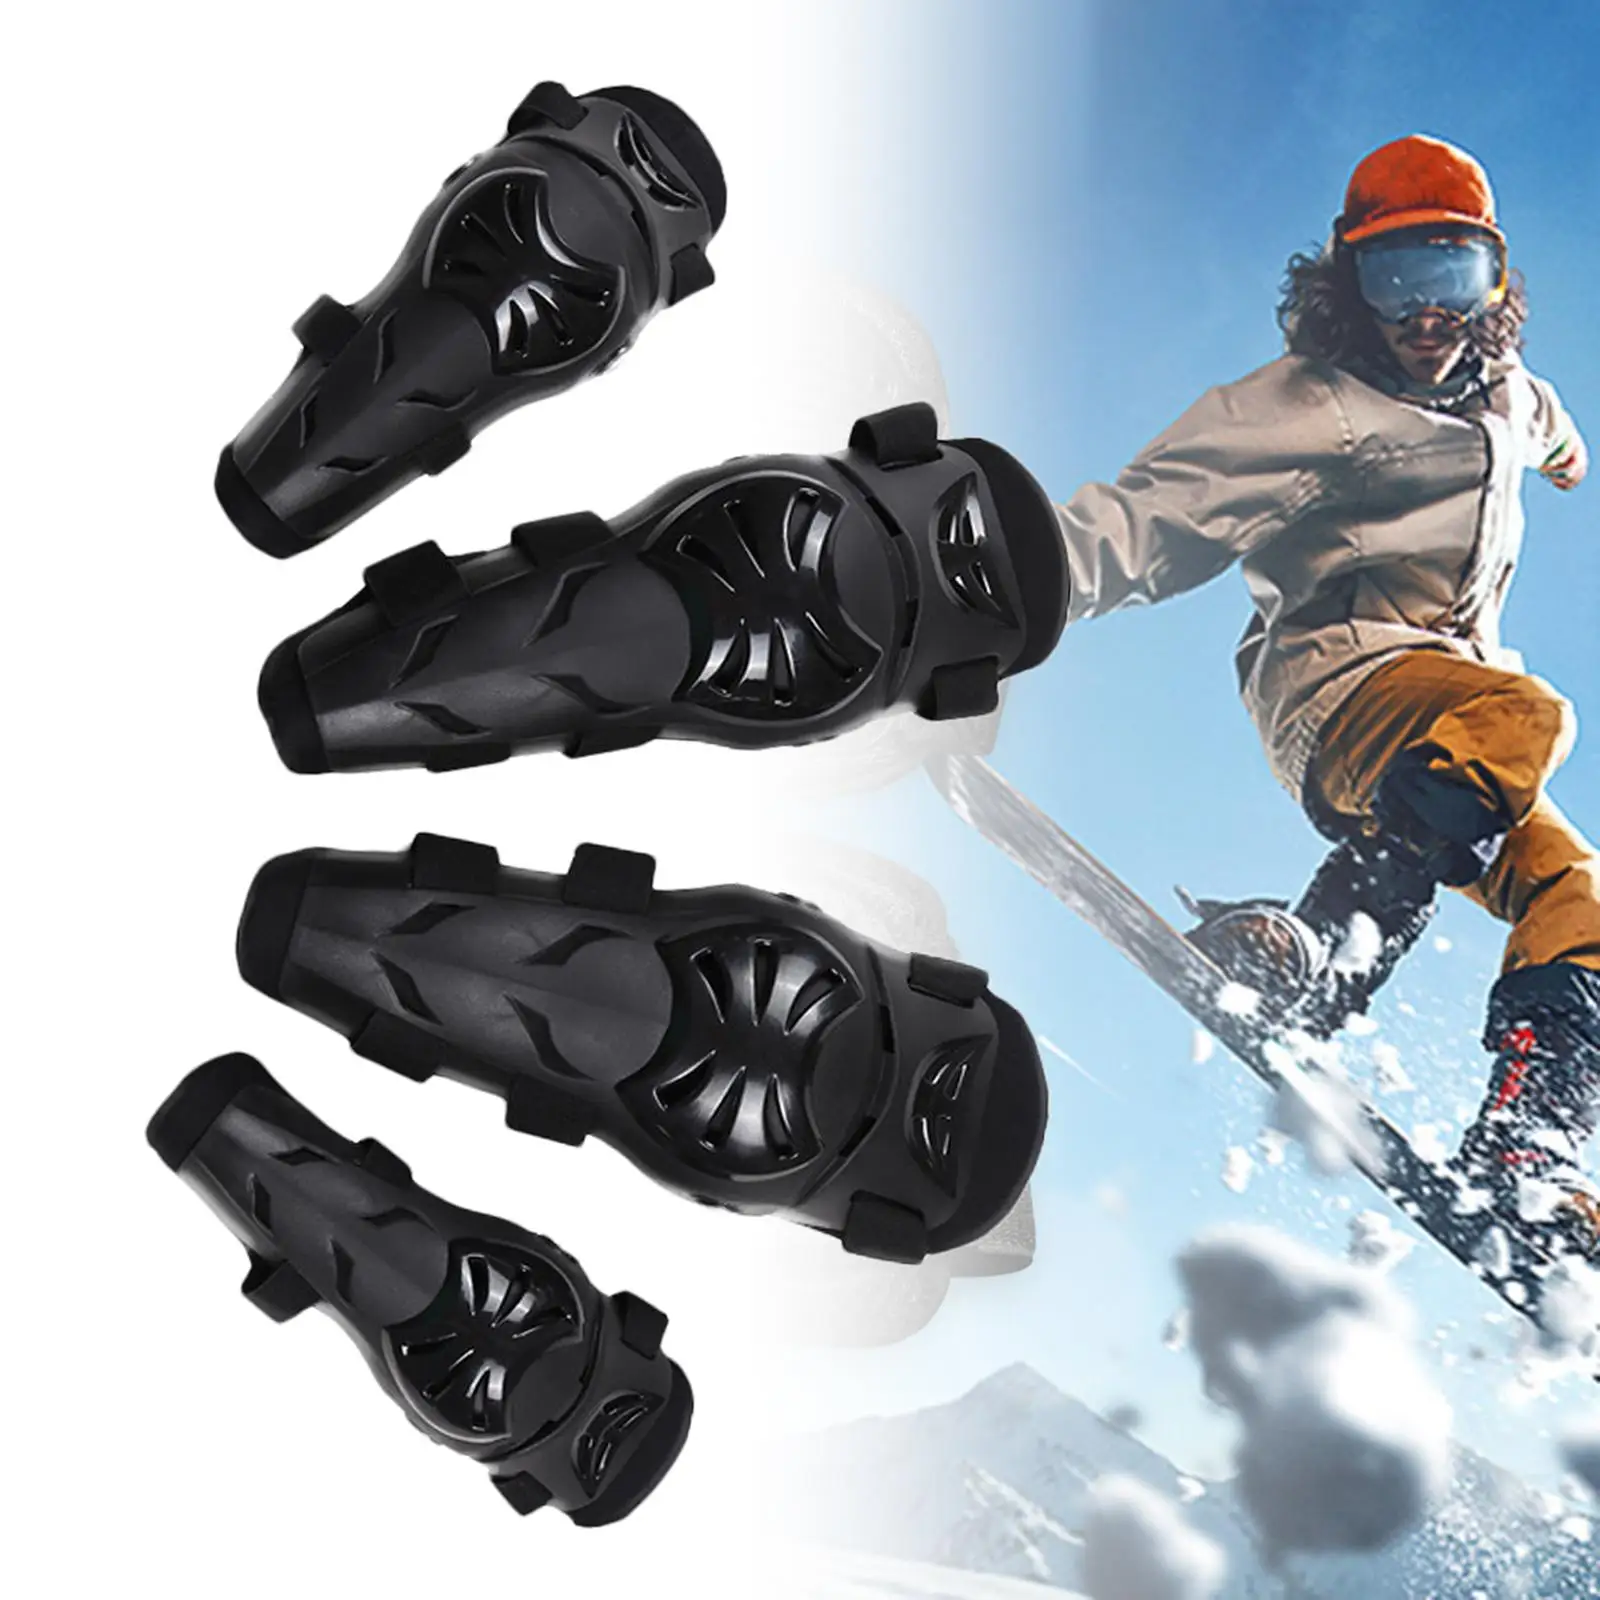 4x Motocross Elbow Knee Shin Guards Cusion for Skateboard Cycling Sport